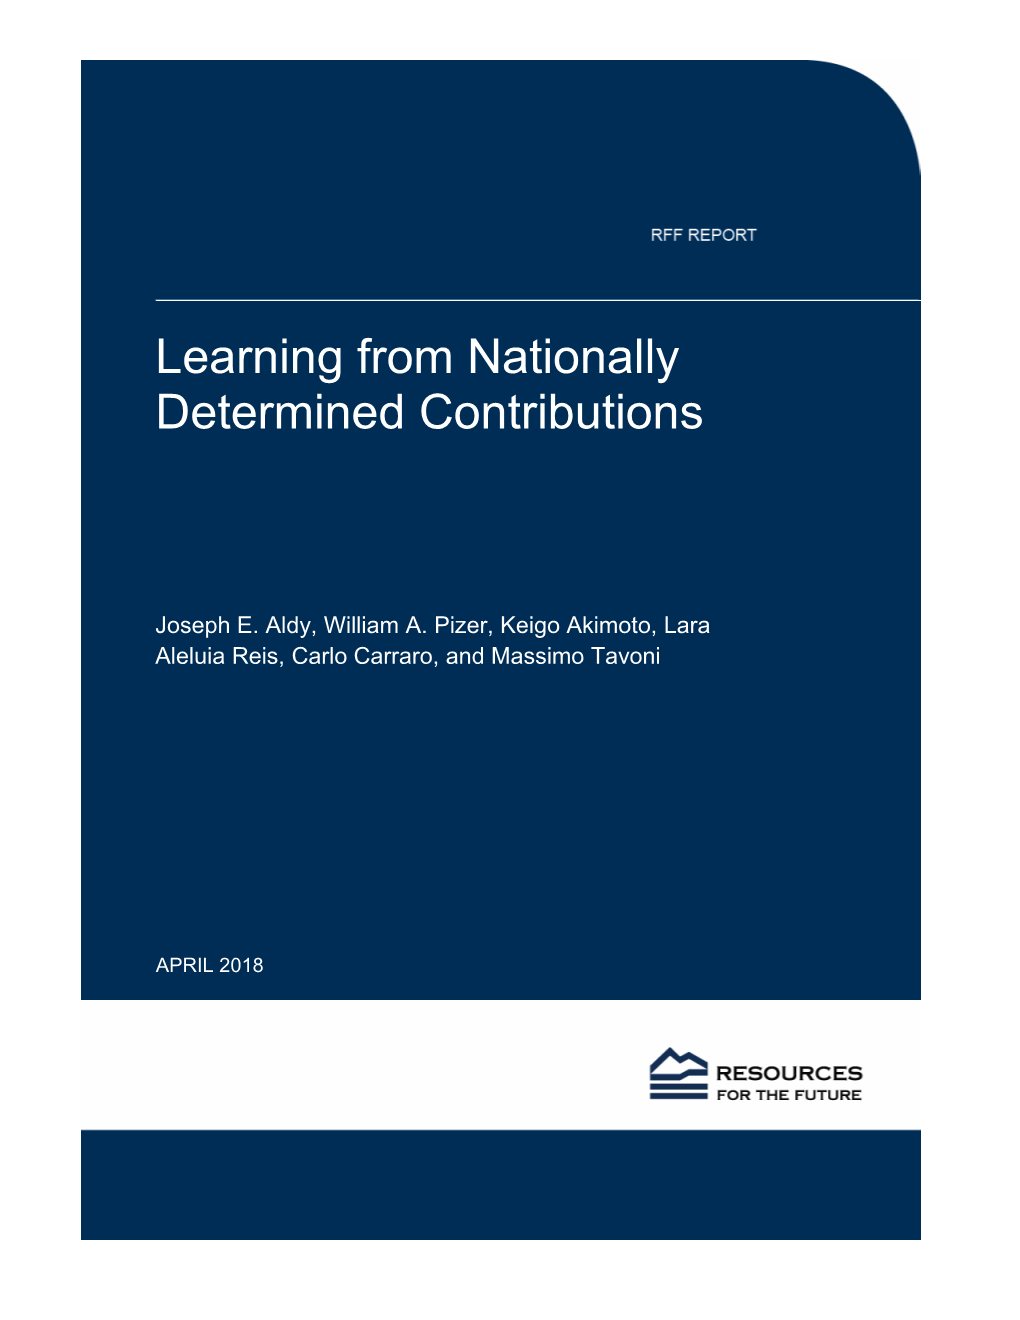 Learning from Nationally Determined Contributions